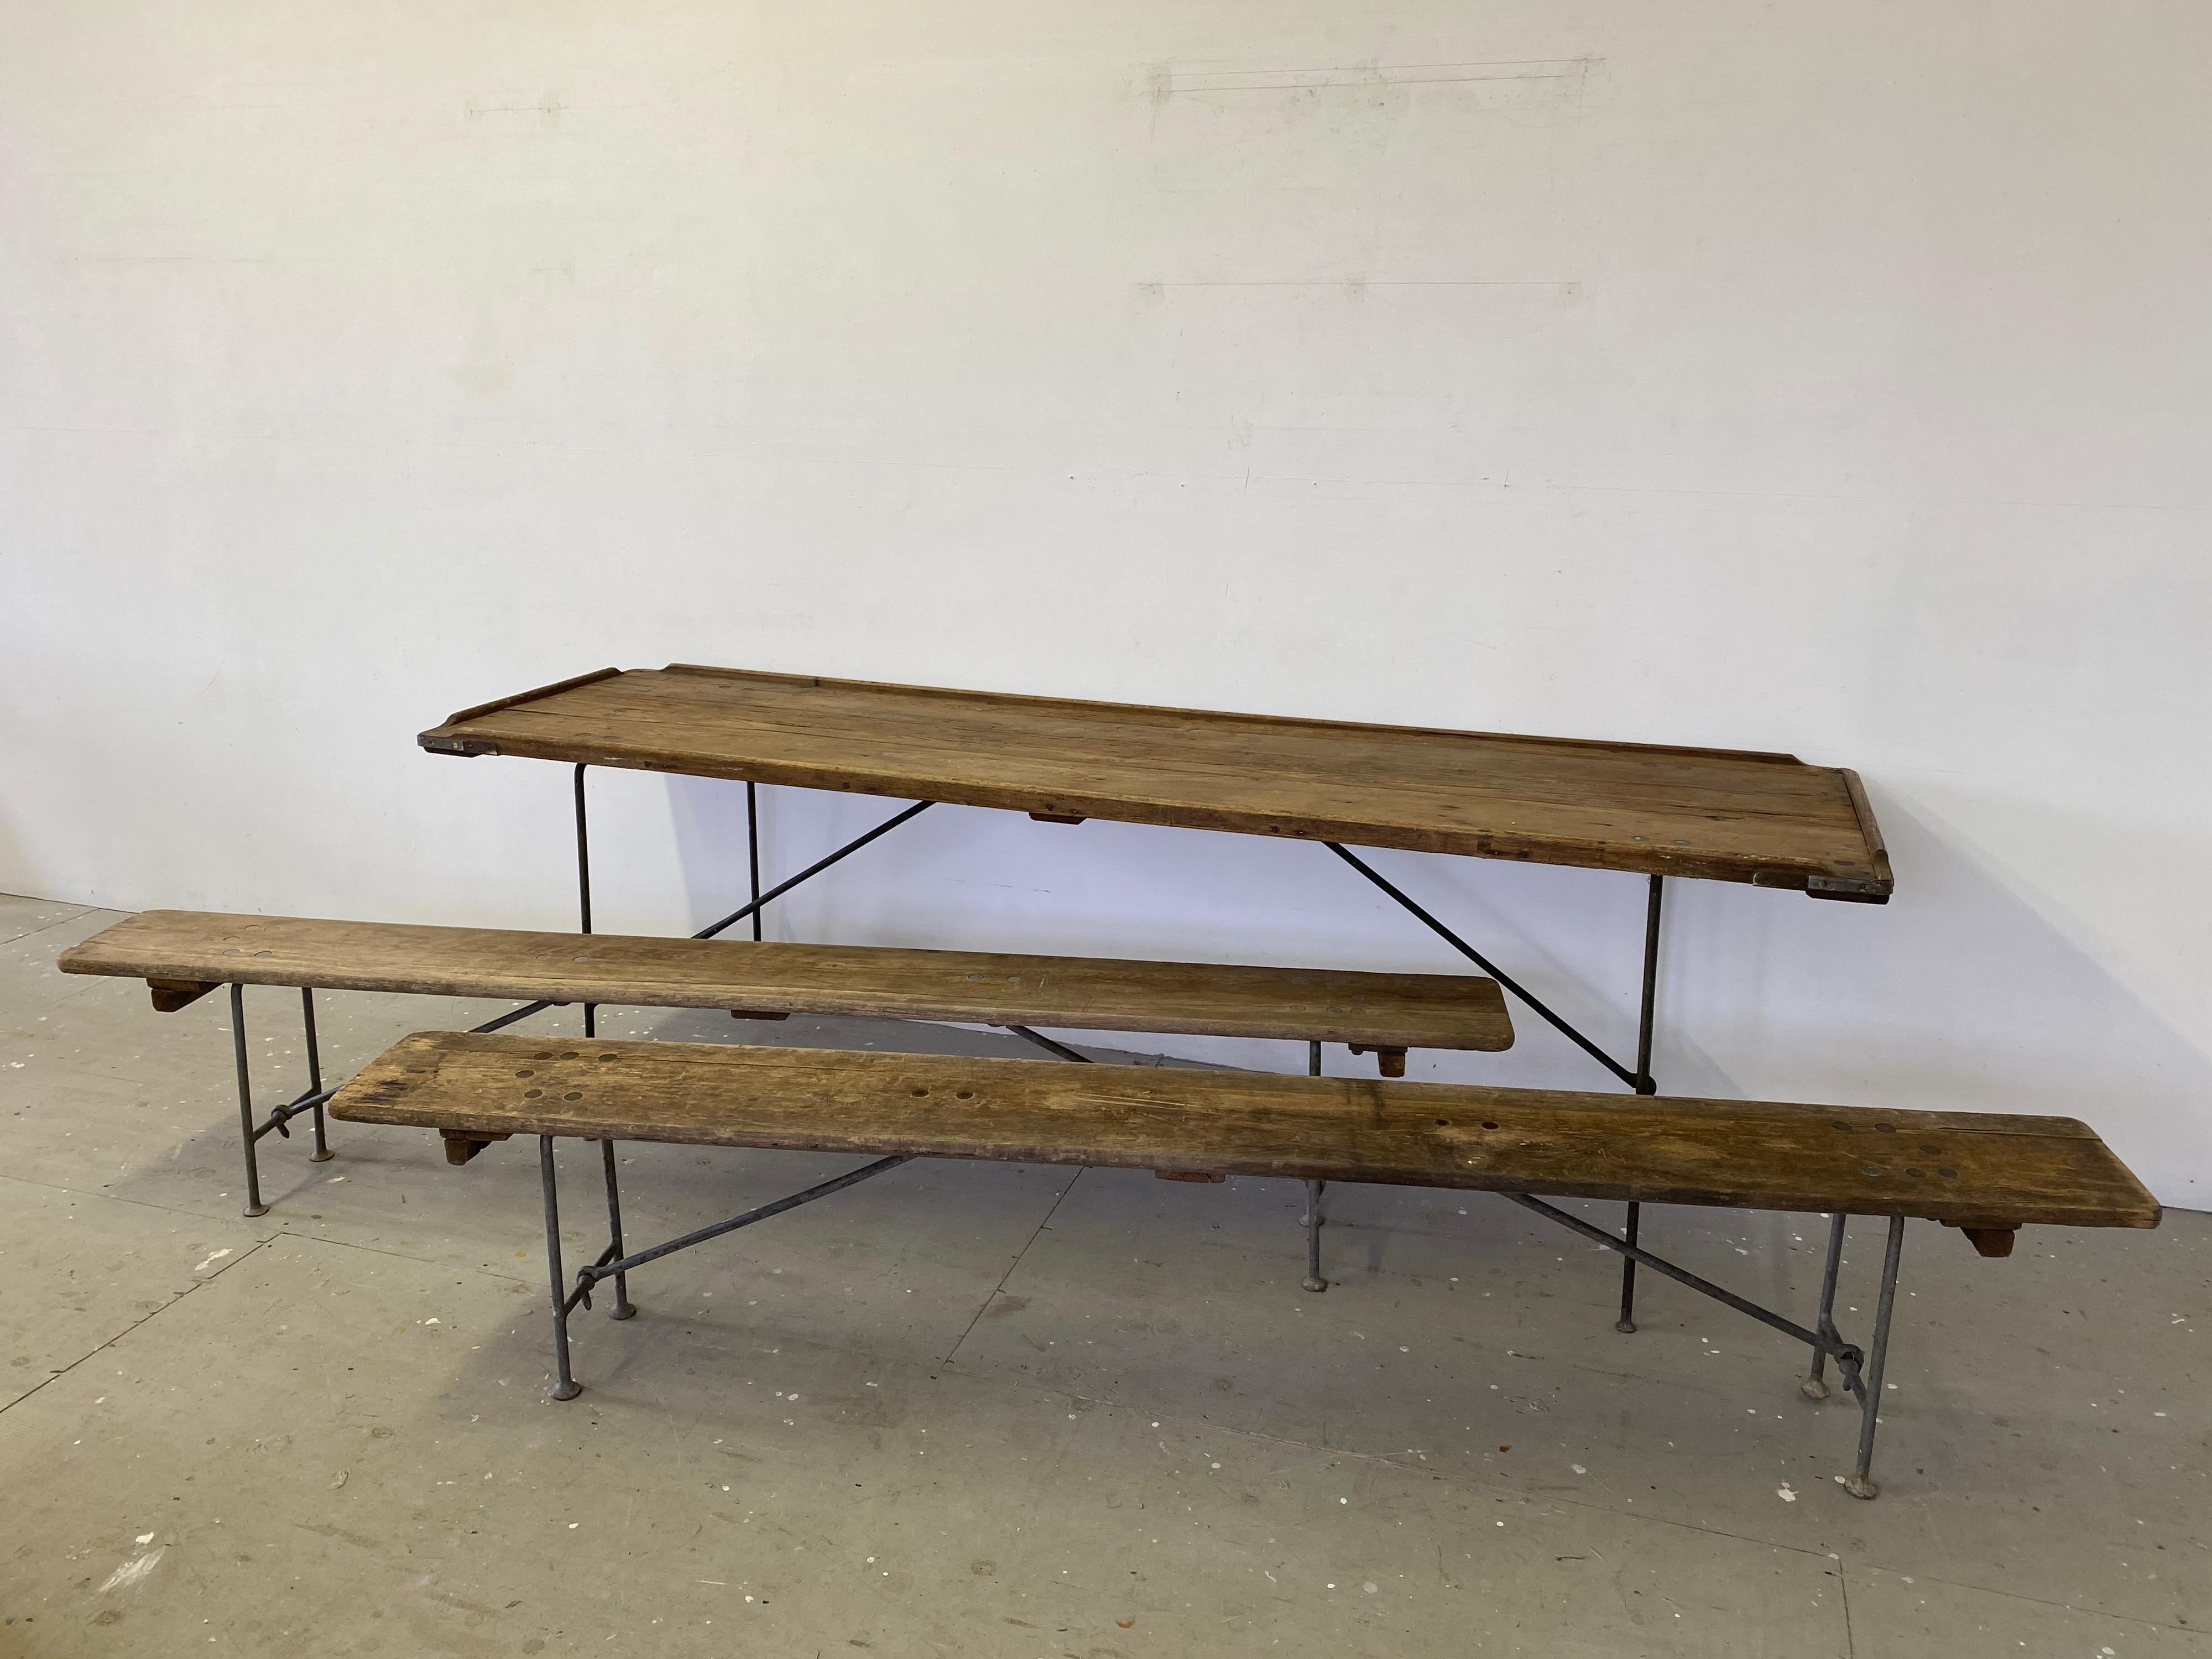 1930s naval/ aircraft carrier table and 2 matching benches. Beautifully engineered and solid folding table and benches! Heavy metal legs fold open or shut to allow for easy set-up! I have had the benches before, but never a table! Table has a lip